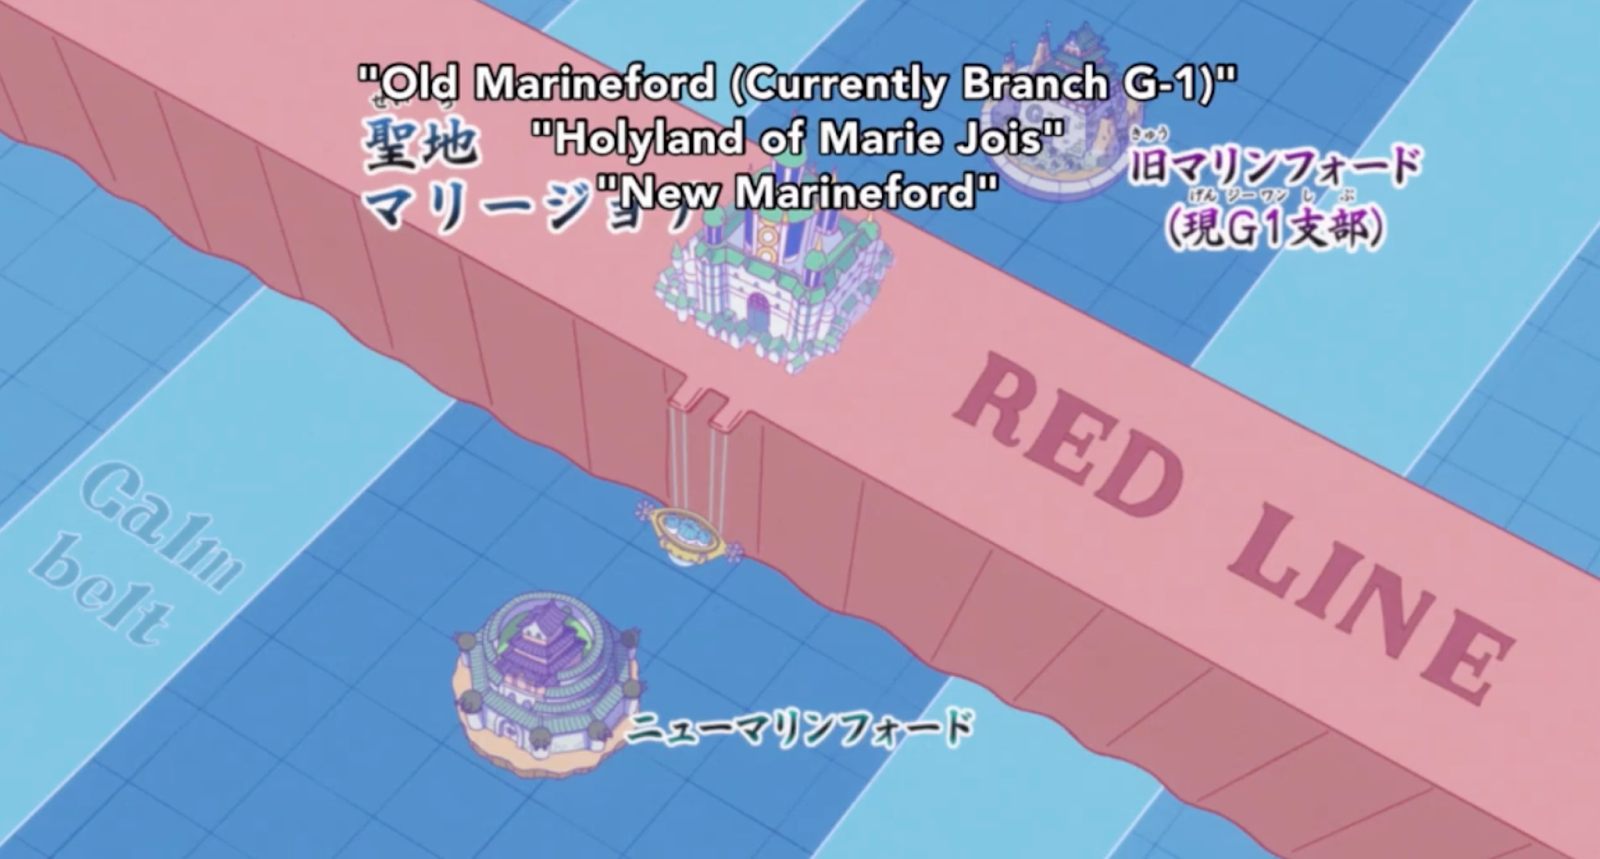 Where is Red Port located in One Piece?